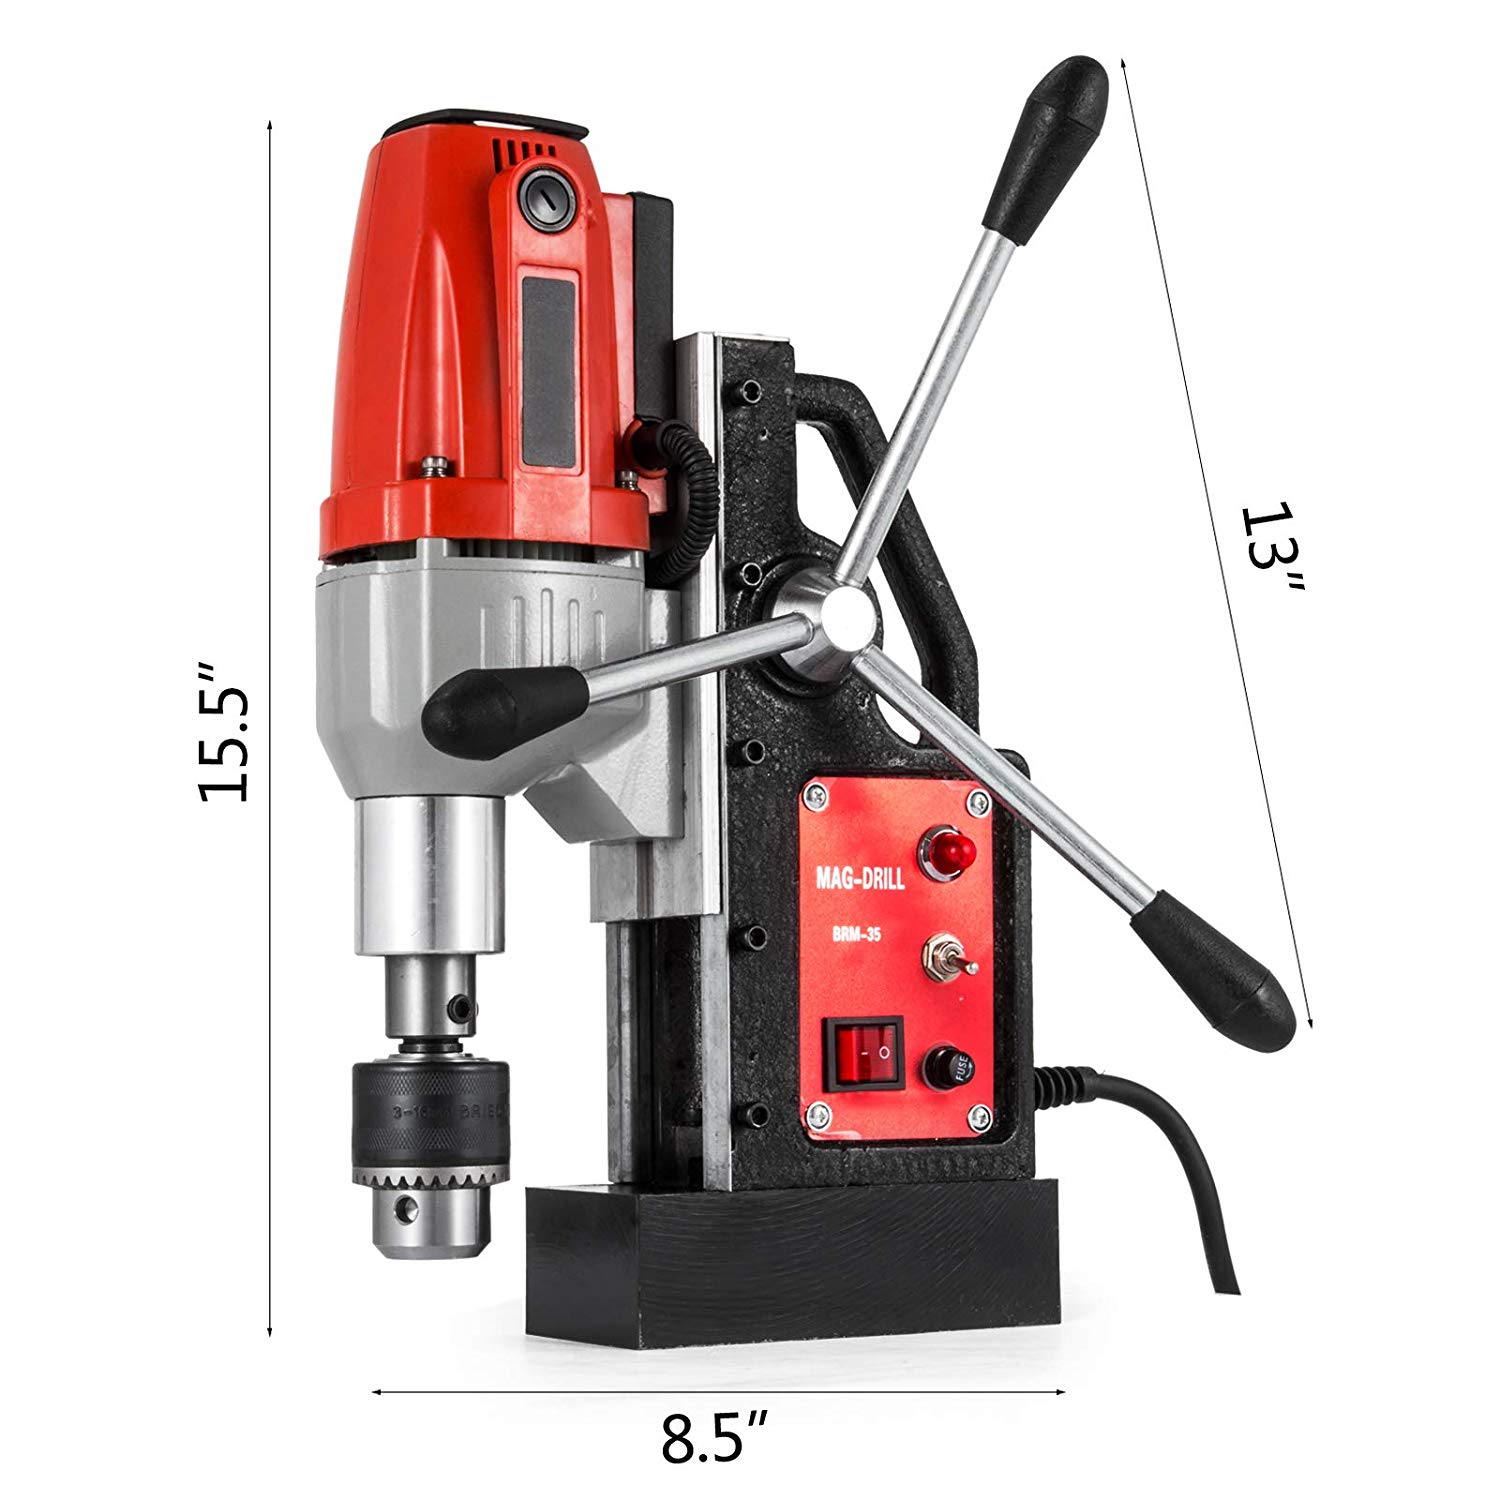 Mophorn 980w Magnetic Drill Press With 1 37 Inch 35mm Boring Diameter